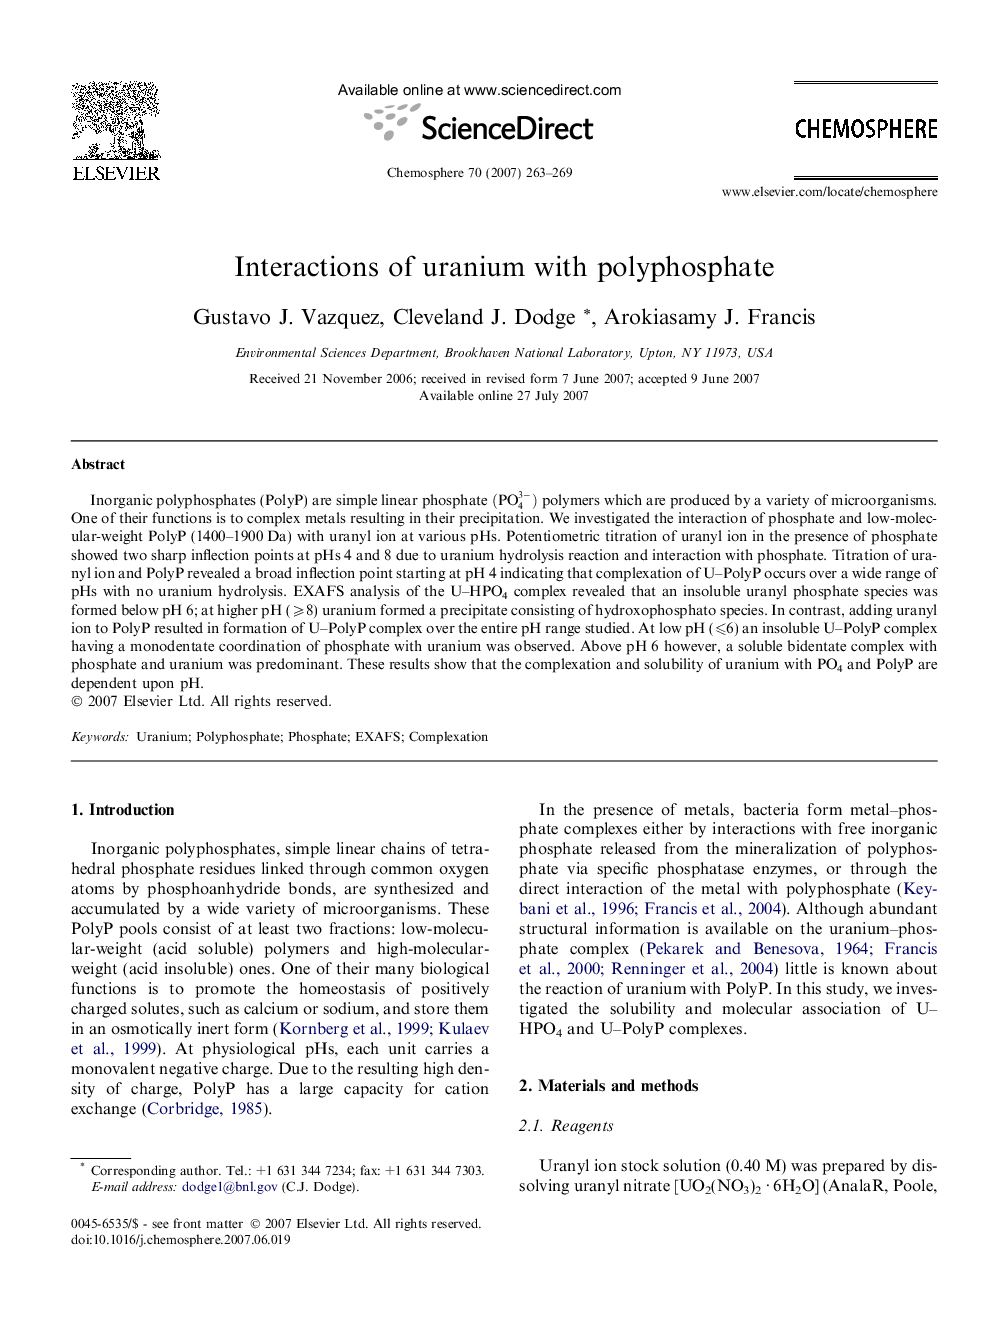 Interactions of uranium with polyphosphate